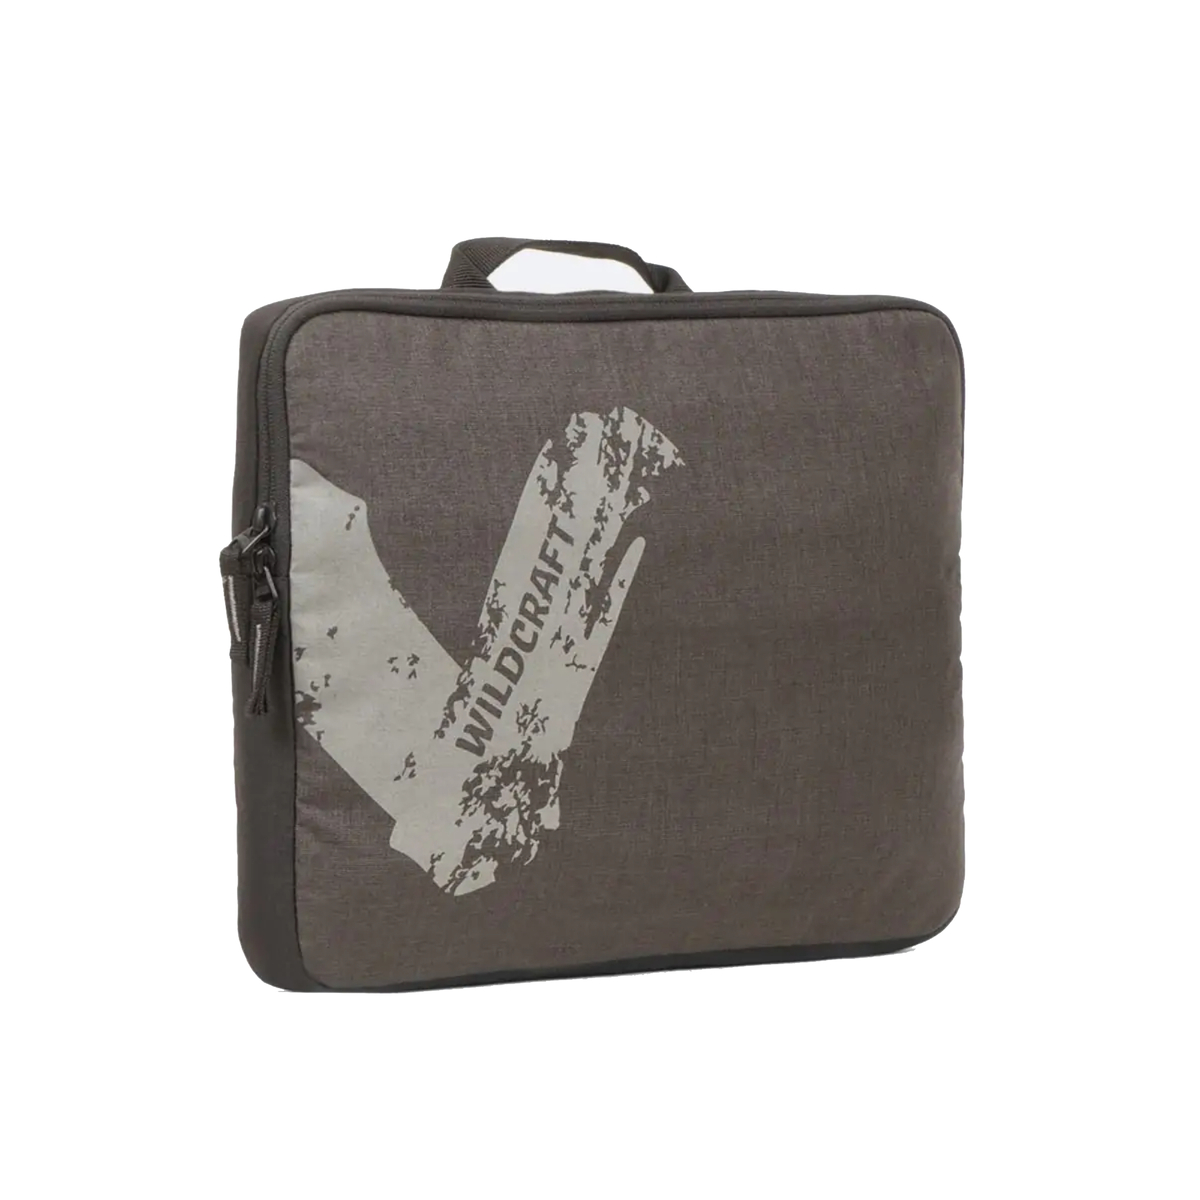 Wildcraft Laptop Sleeve Corp Bag, 14.5 Inches, Grey, WC-411048